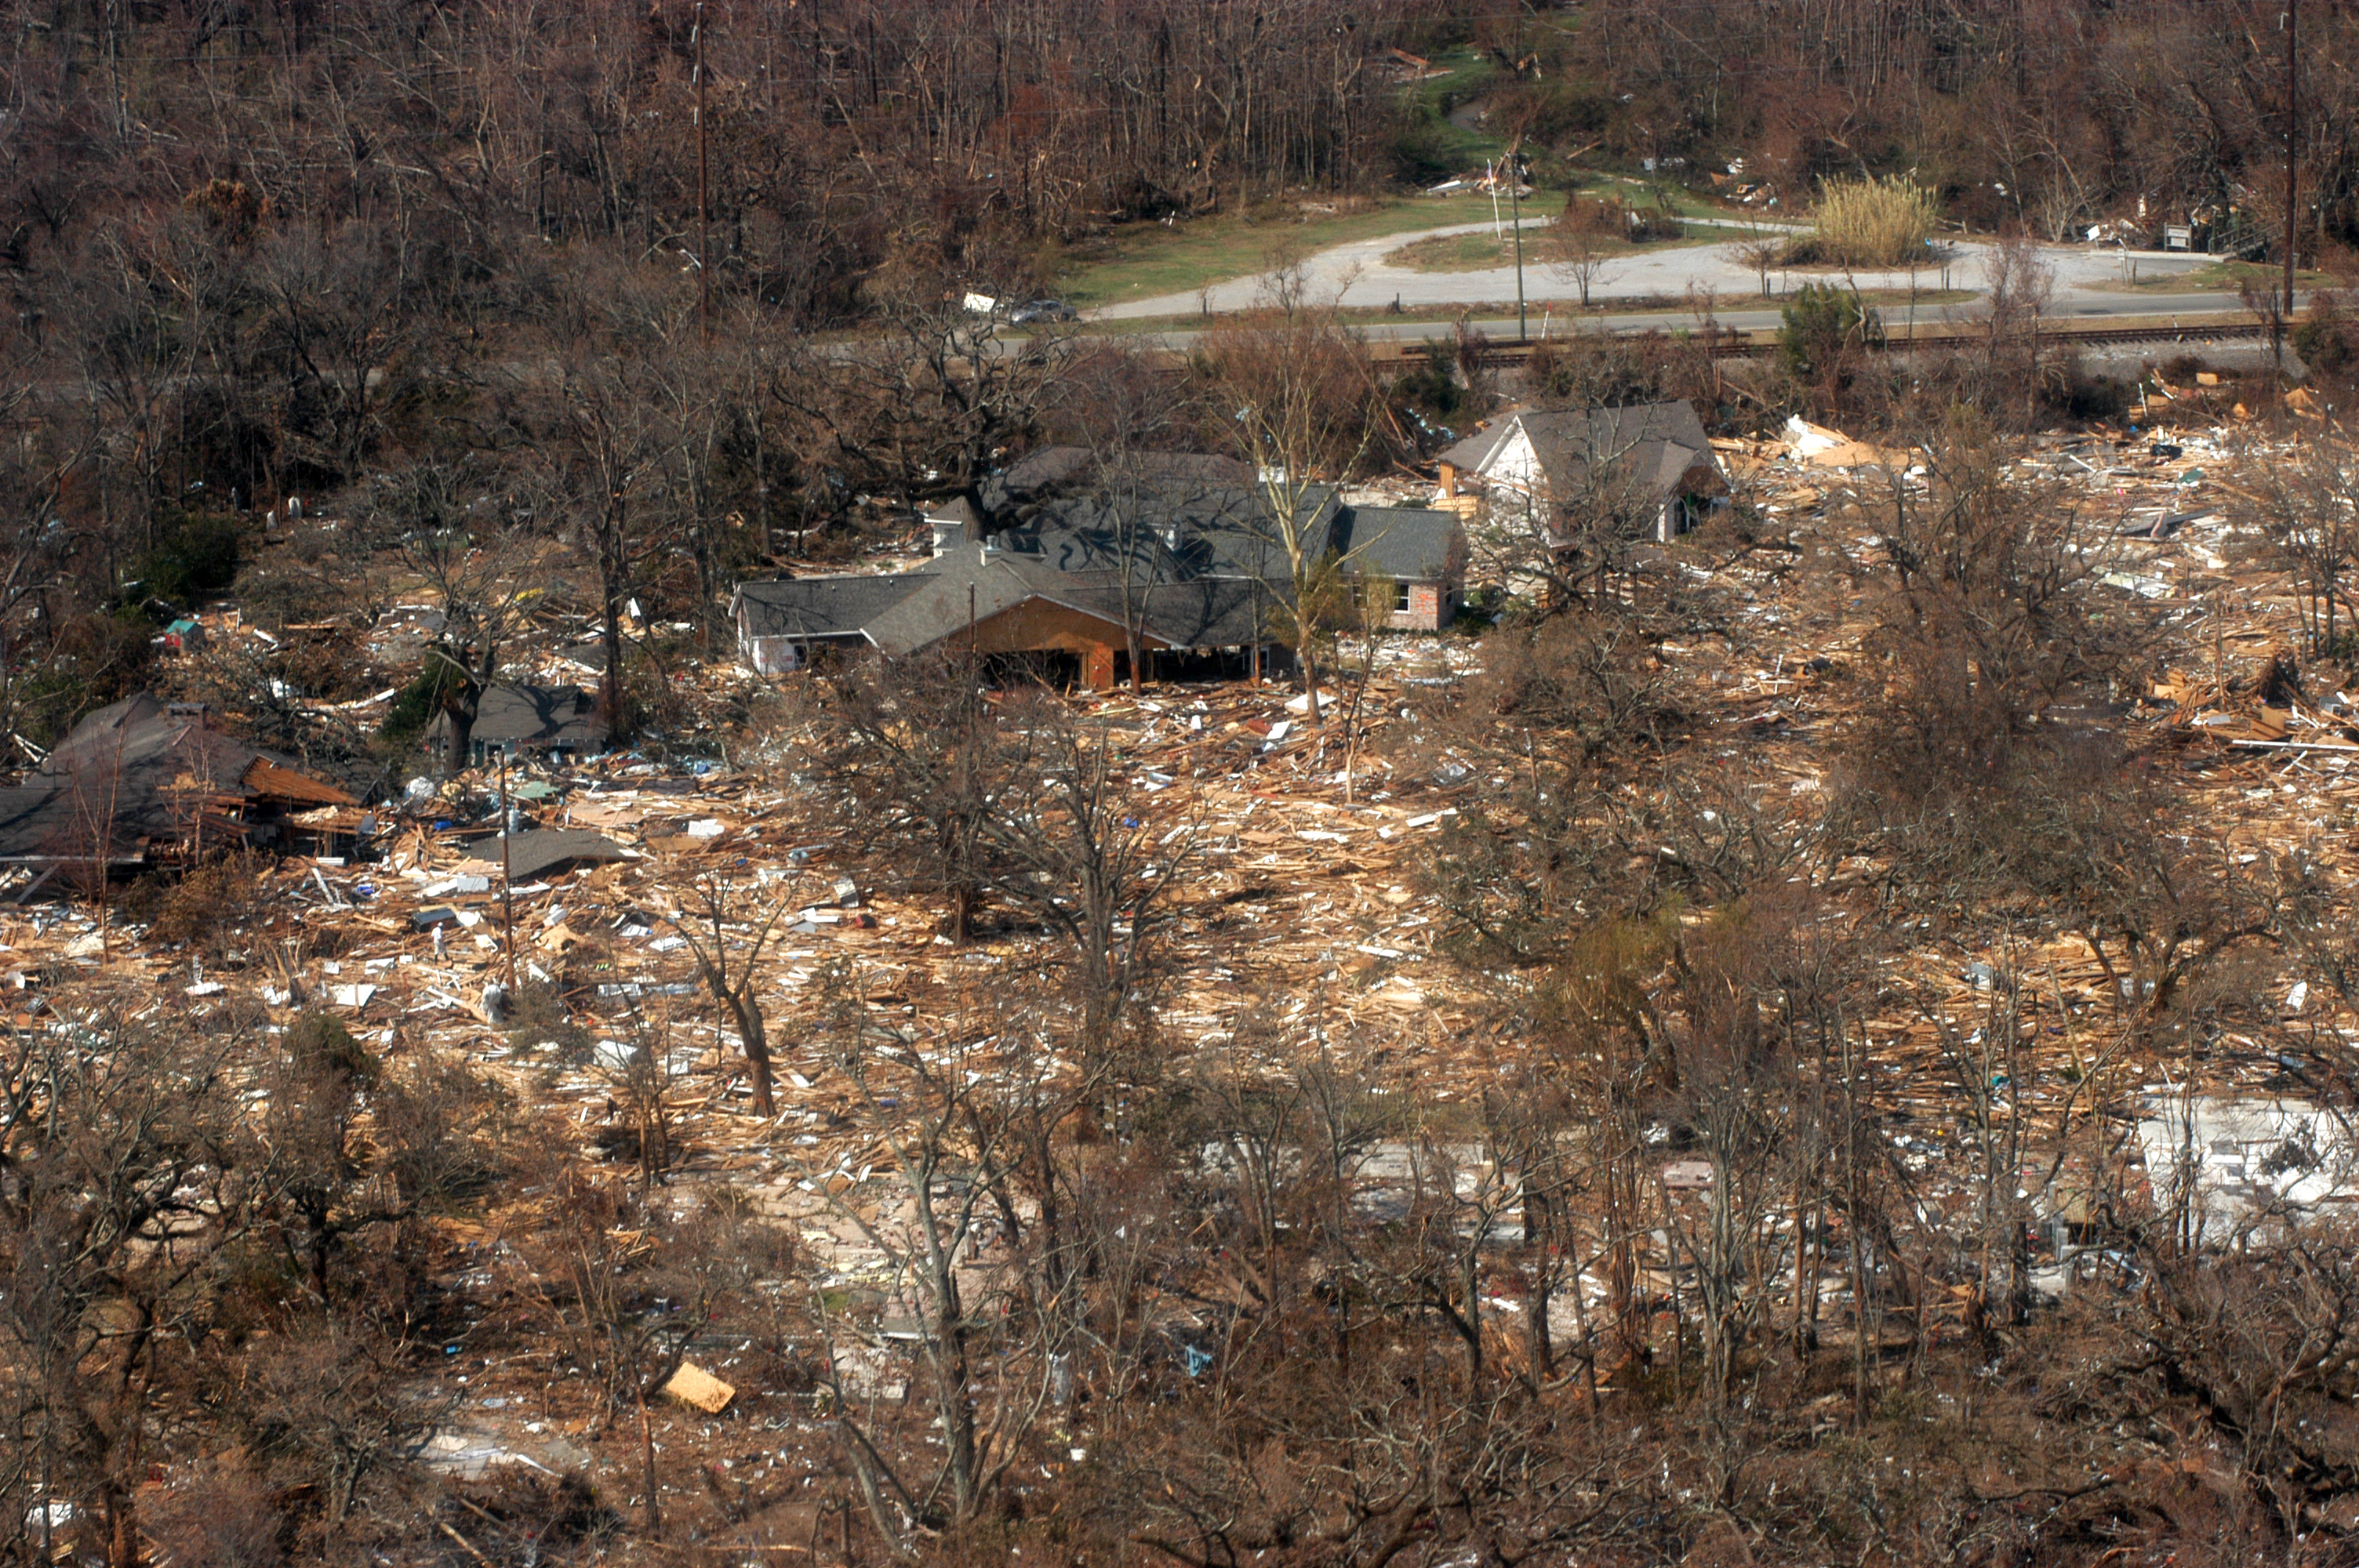 FEMA - 14810 - Photograph by Mark Wolfe taken on 09-06-2005 in Mississippi